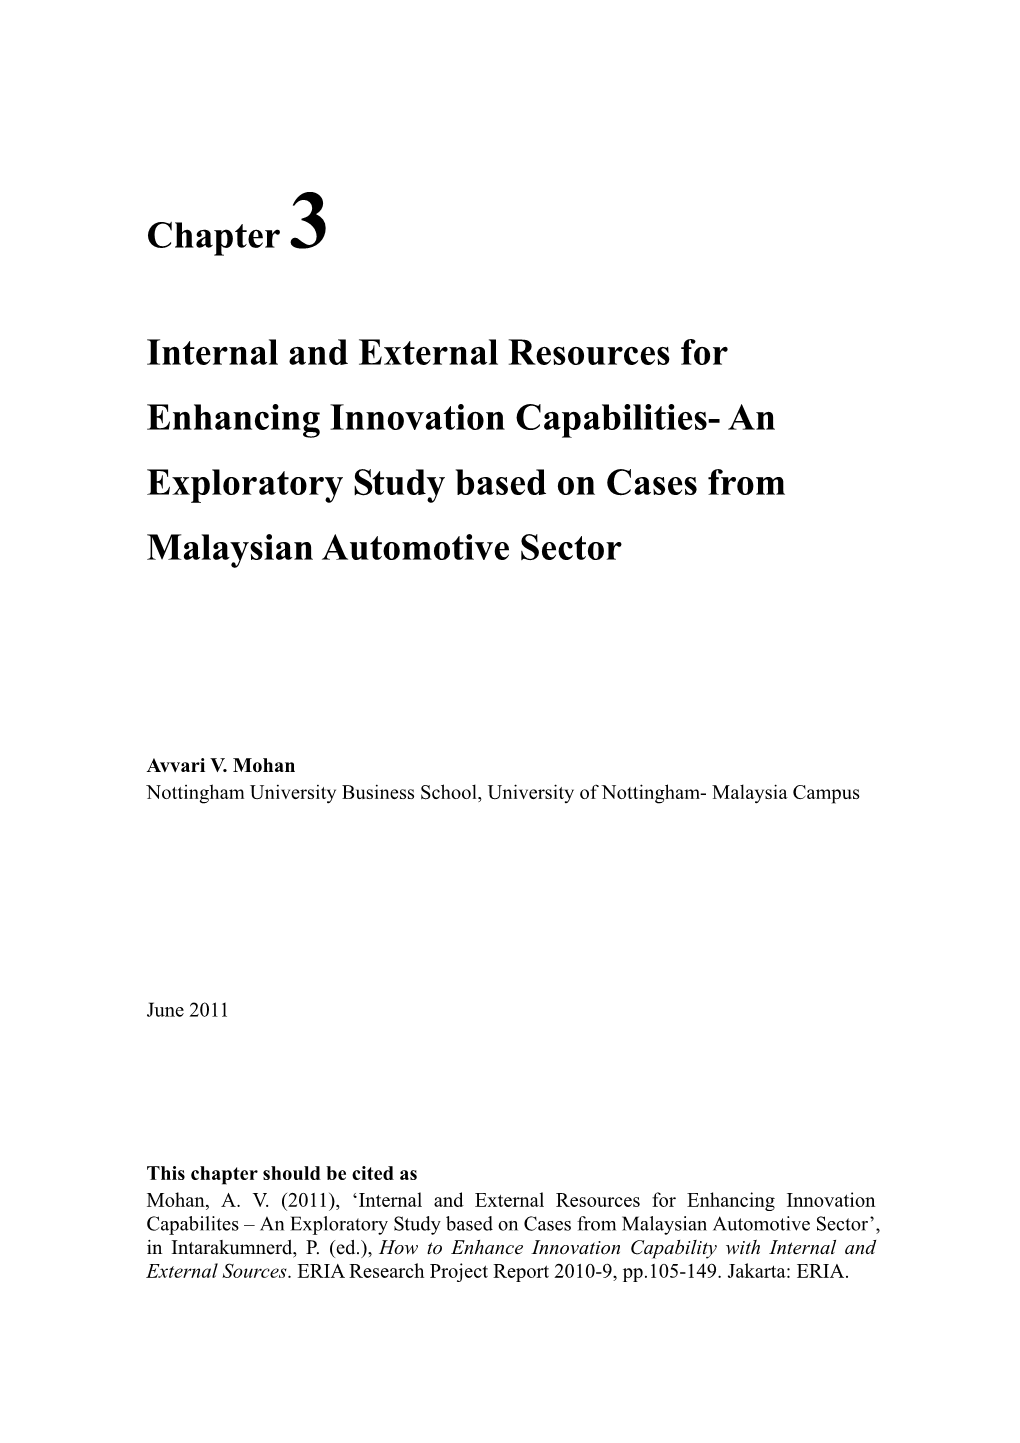 3. Internal and External Resources for Enhancing Innovation Capabilities